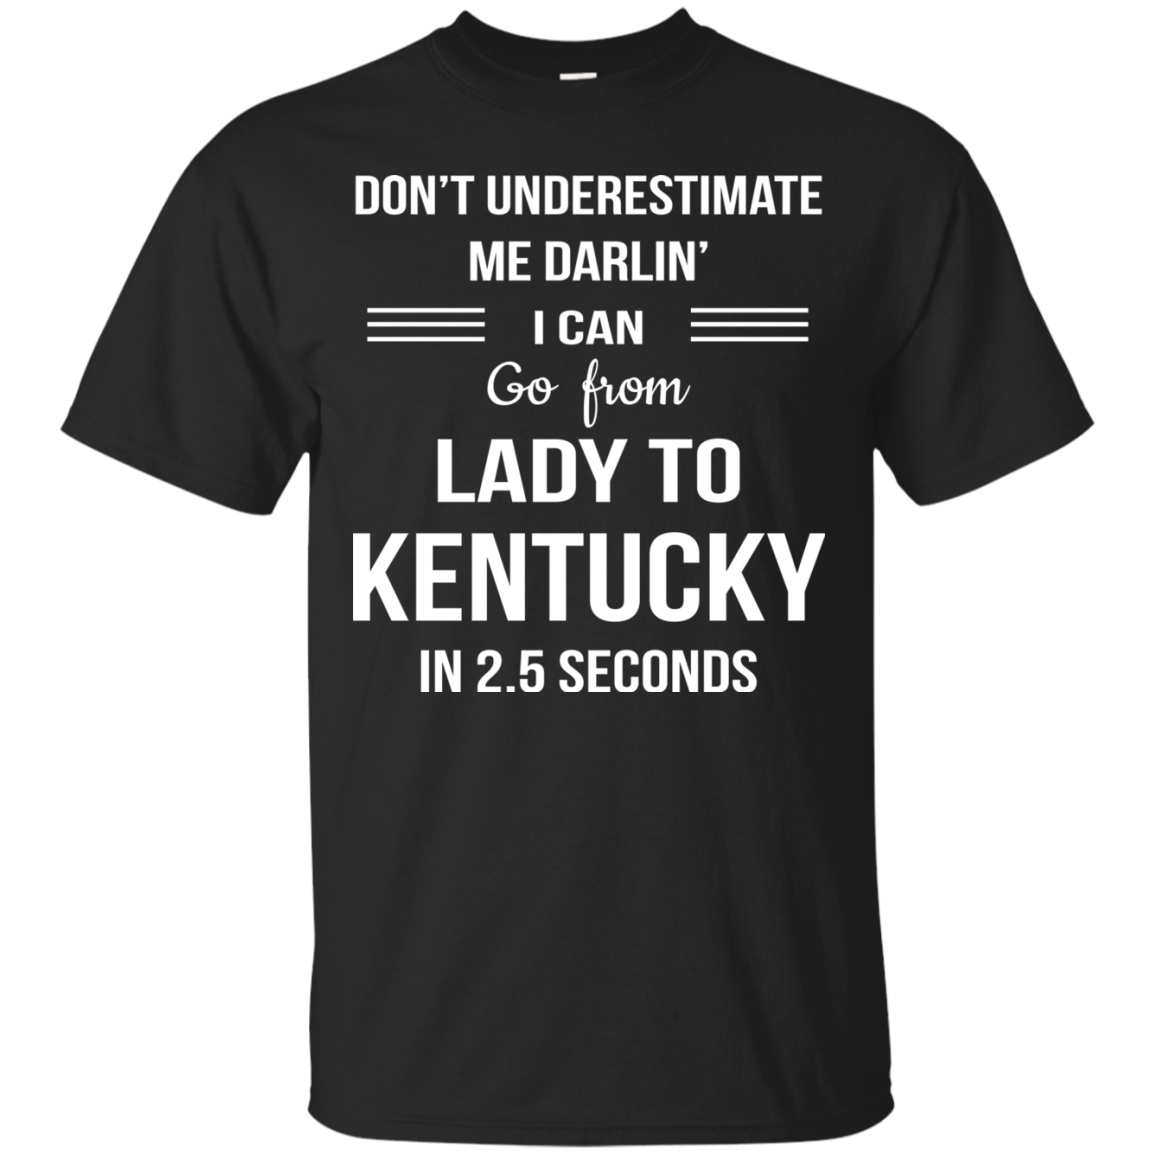 Don't underestimate me darlin' I can go from Lady to Kentucky in 2.5 seconds Shirt